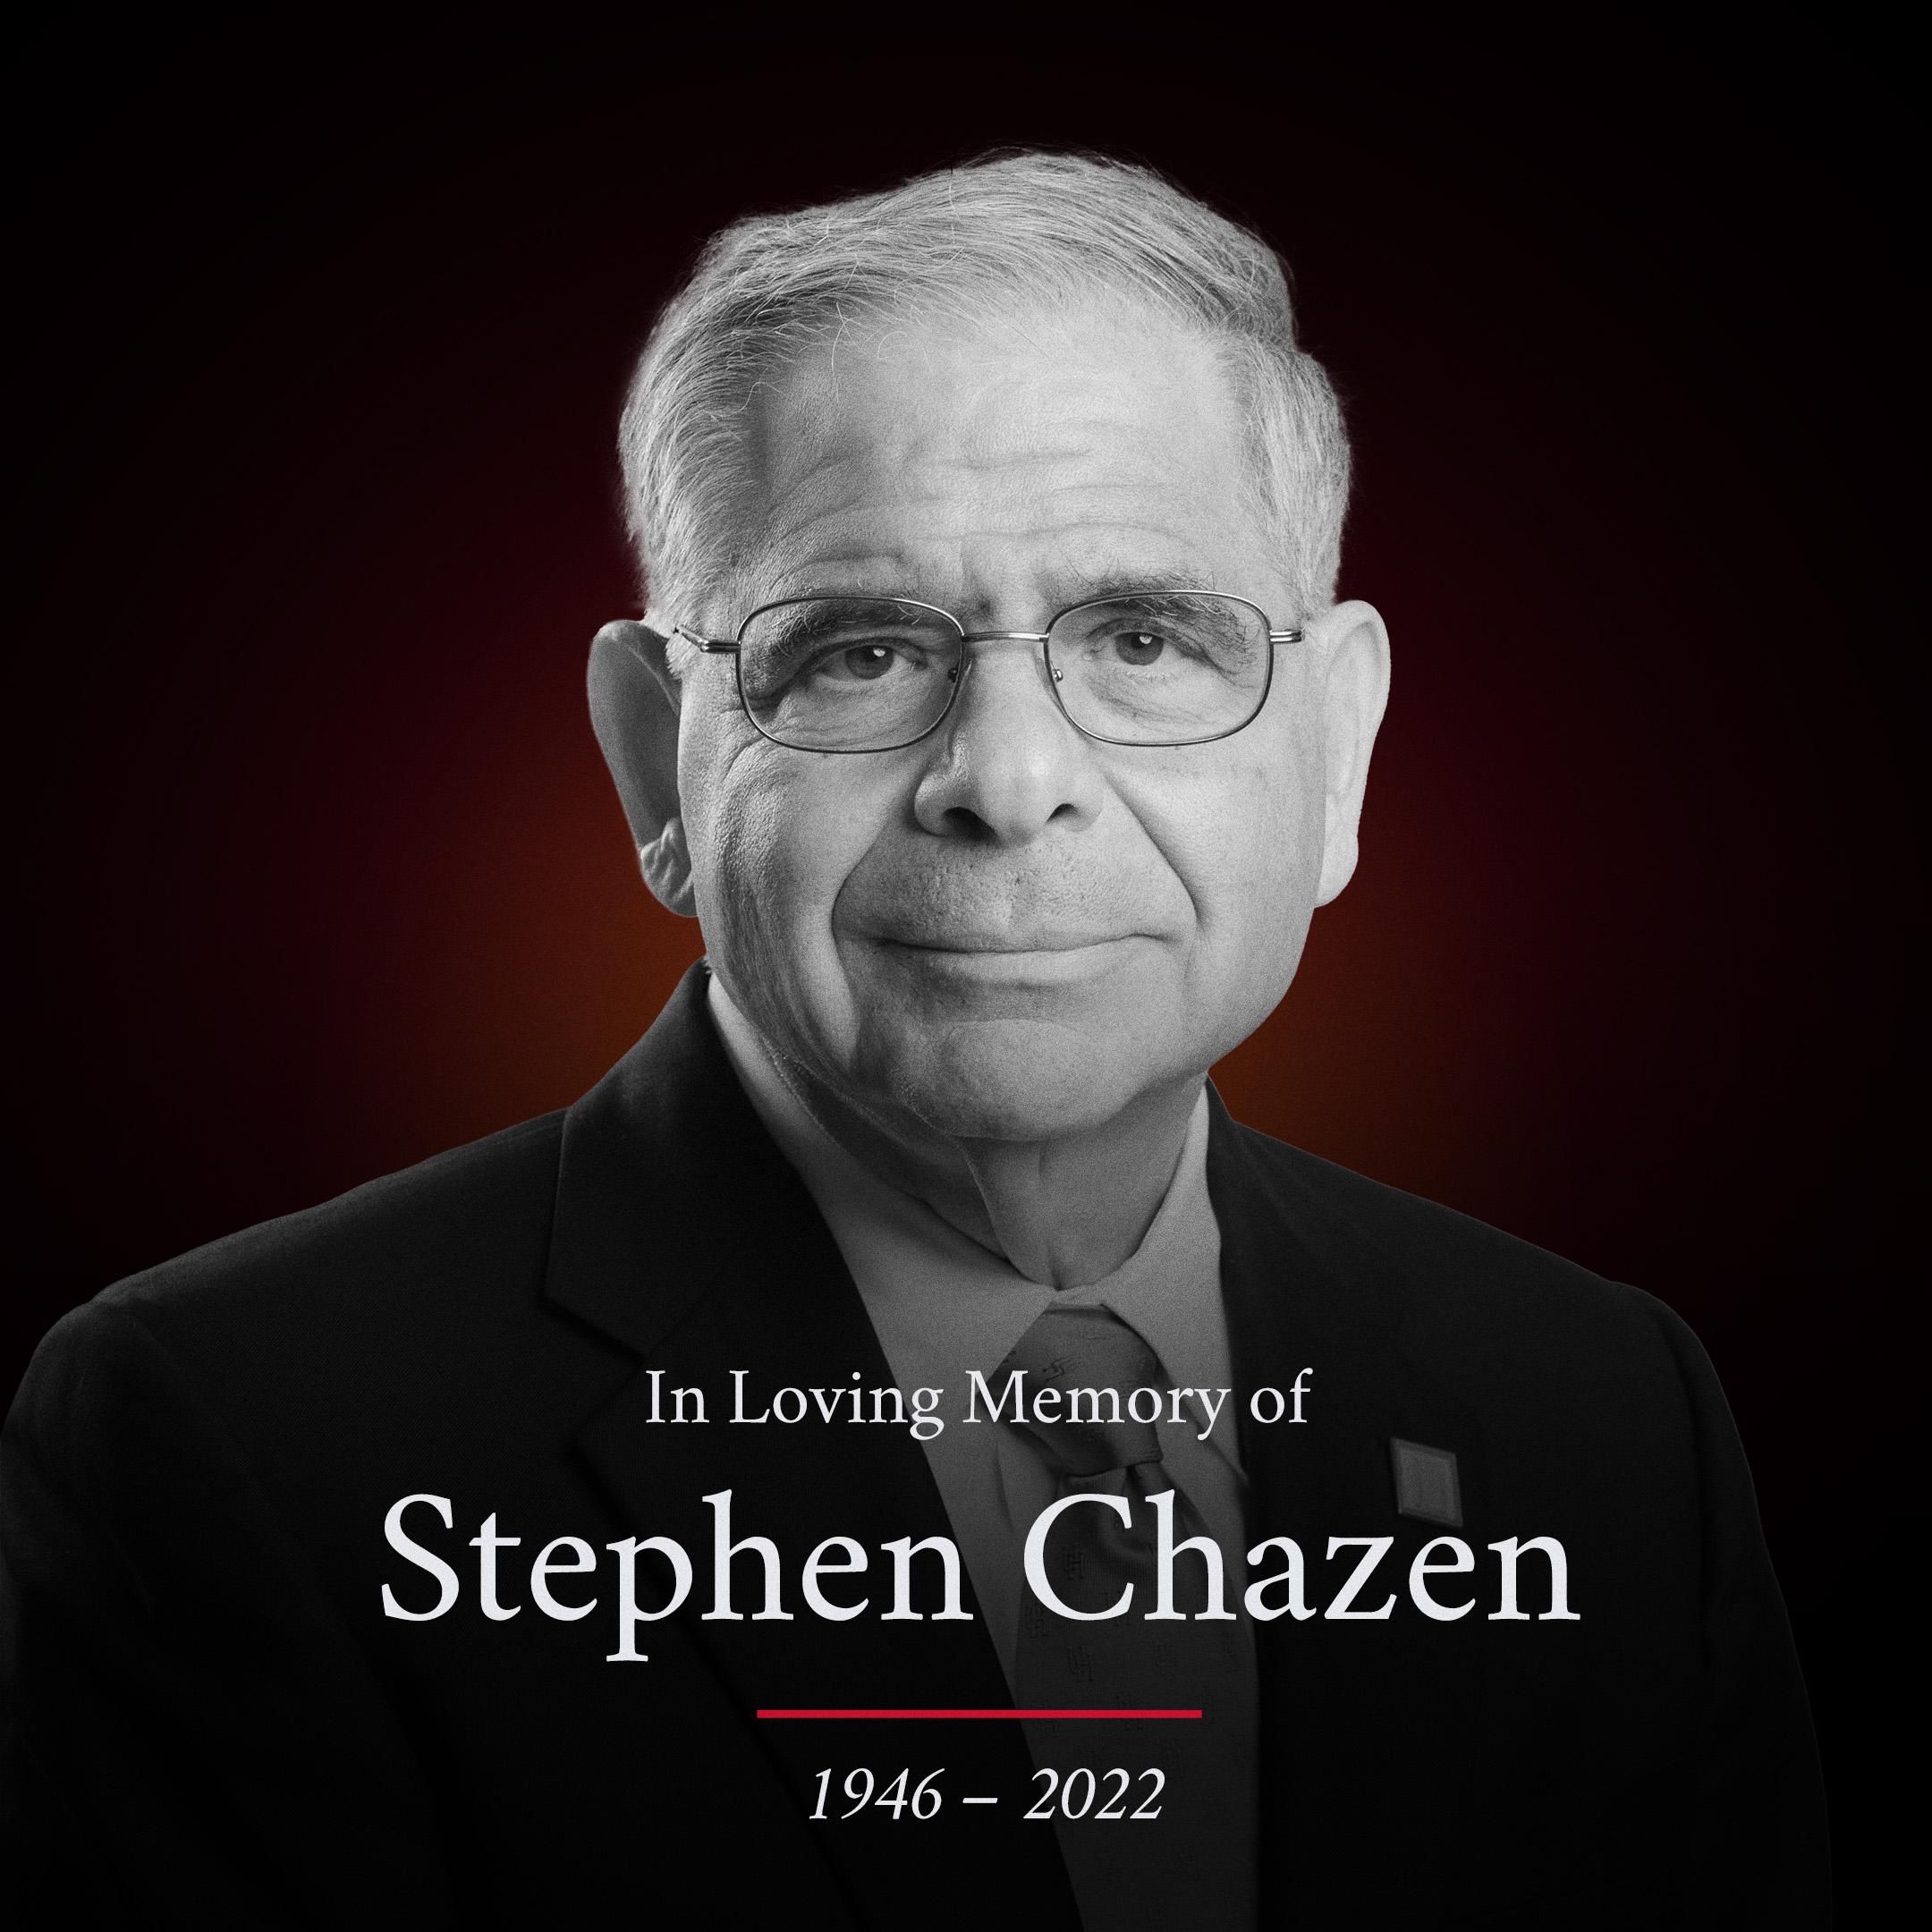 Stephen Chazen photo with graphic text "In Loving Memory of Stephen Chazen"